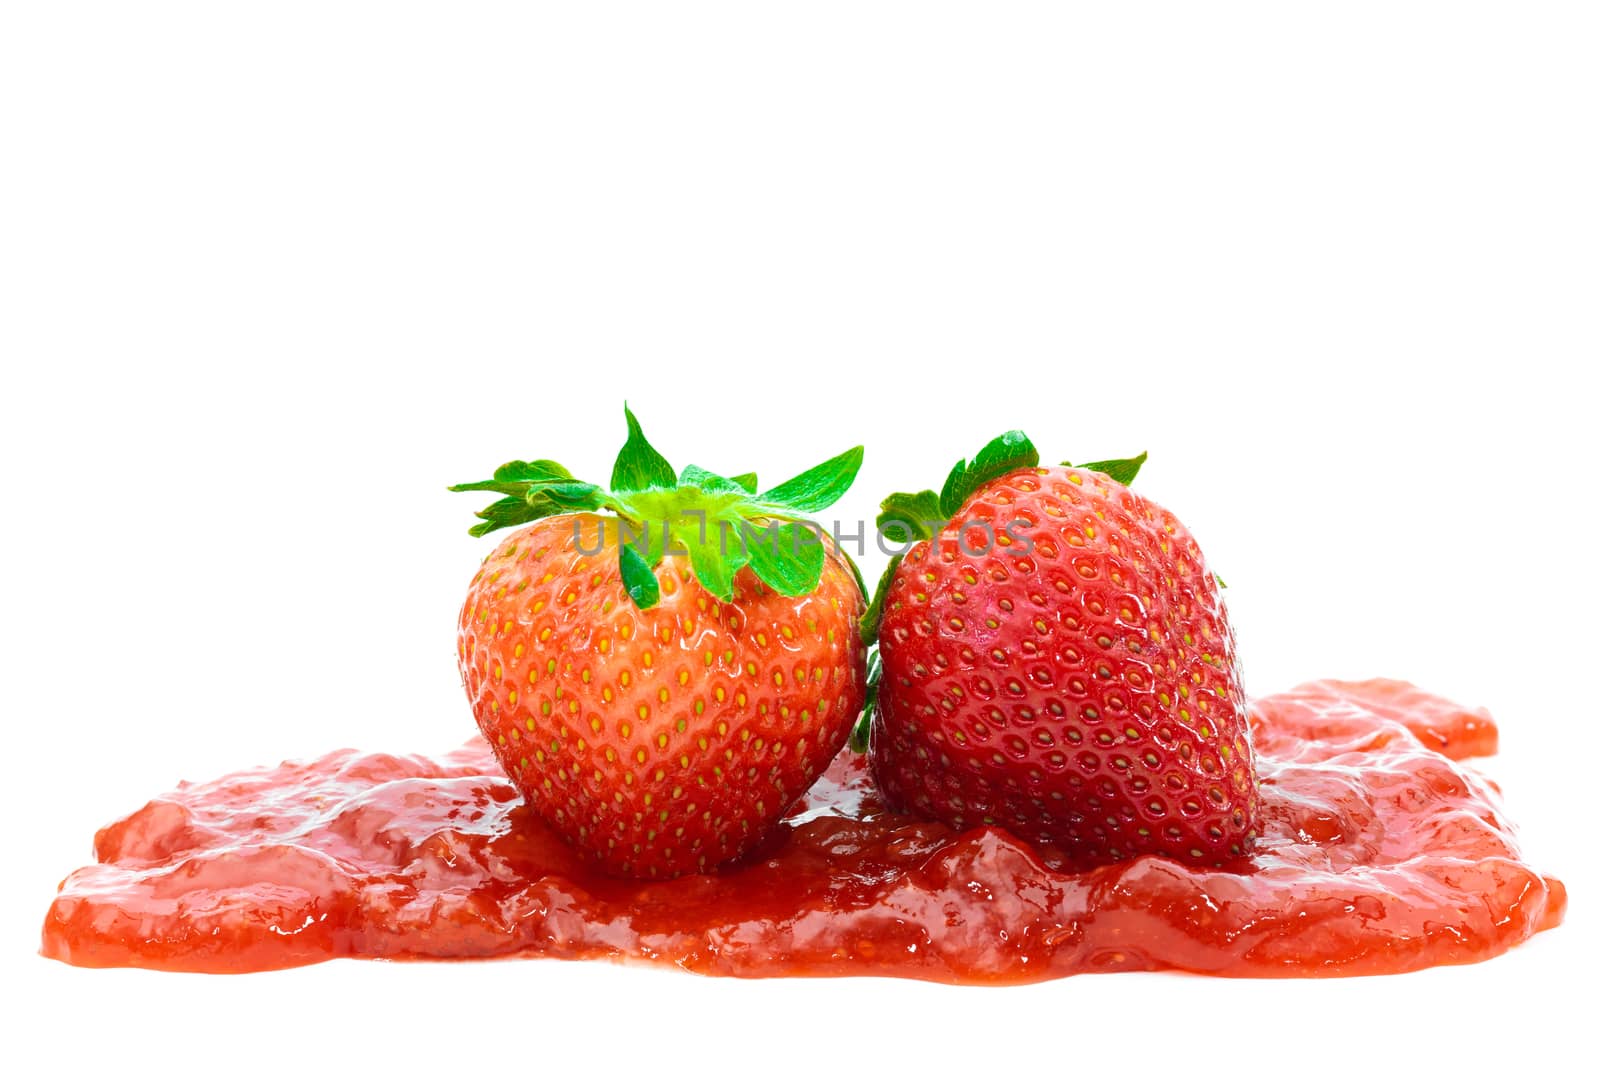 Strawberry and Jam on white background. by sompongtom